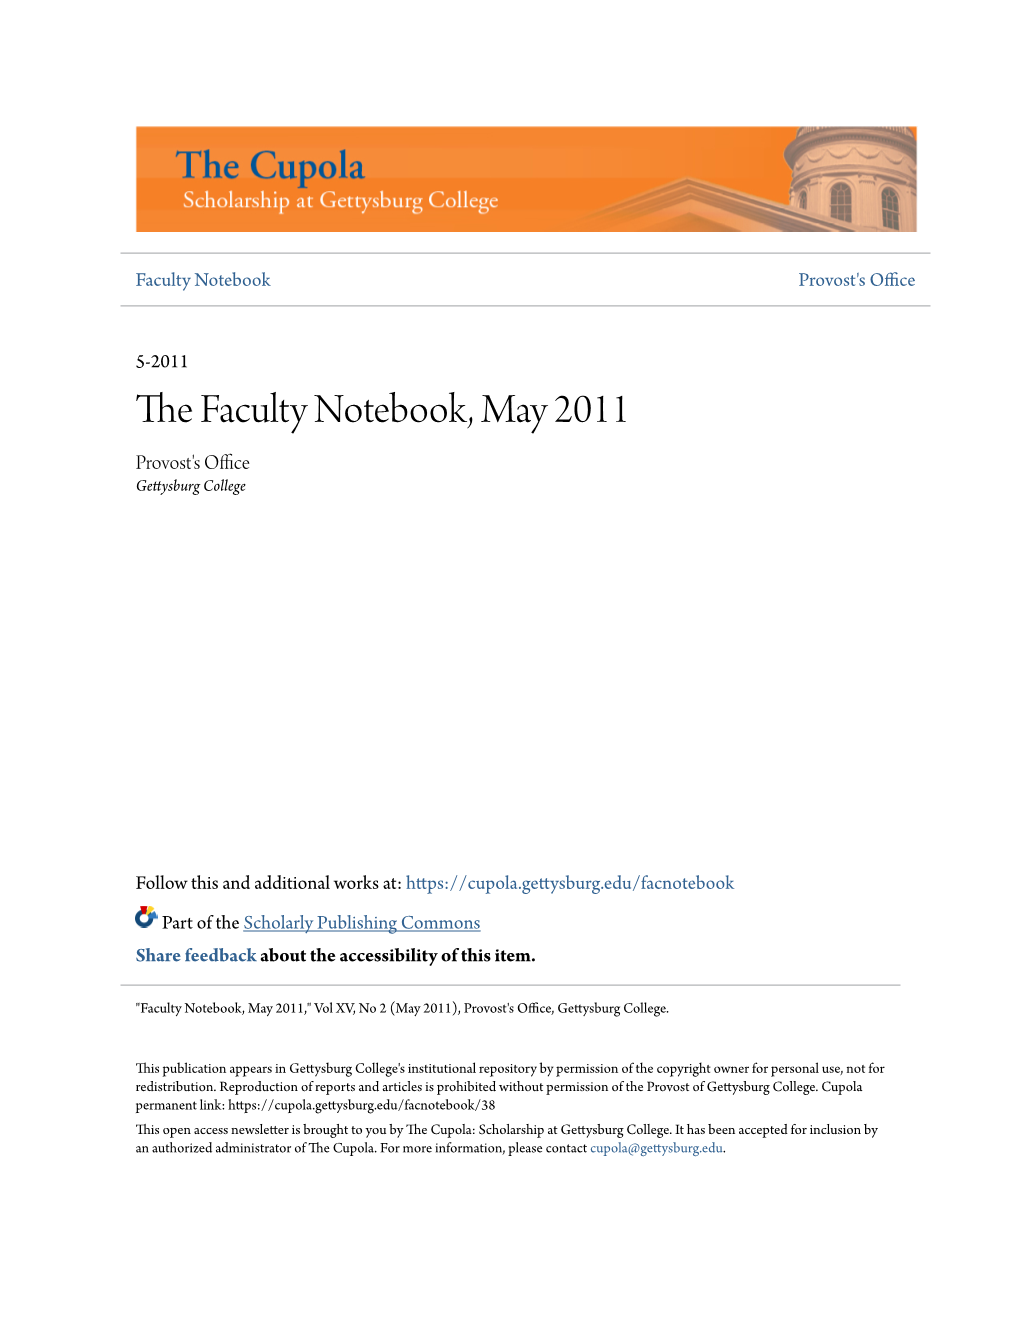 The Faculty Notebook, May 2011